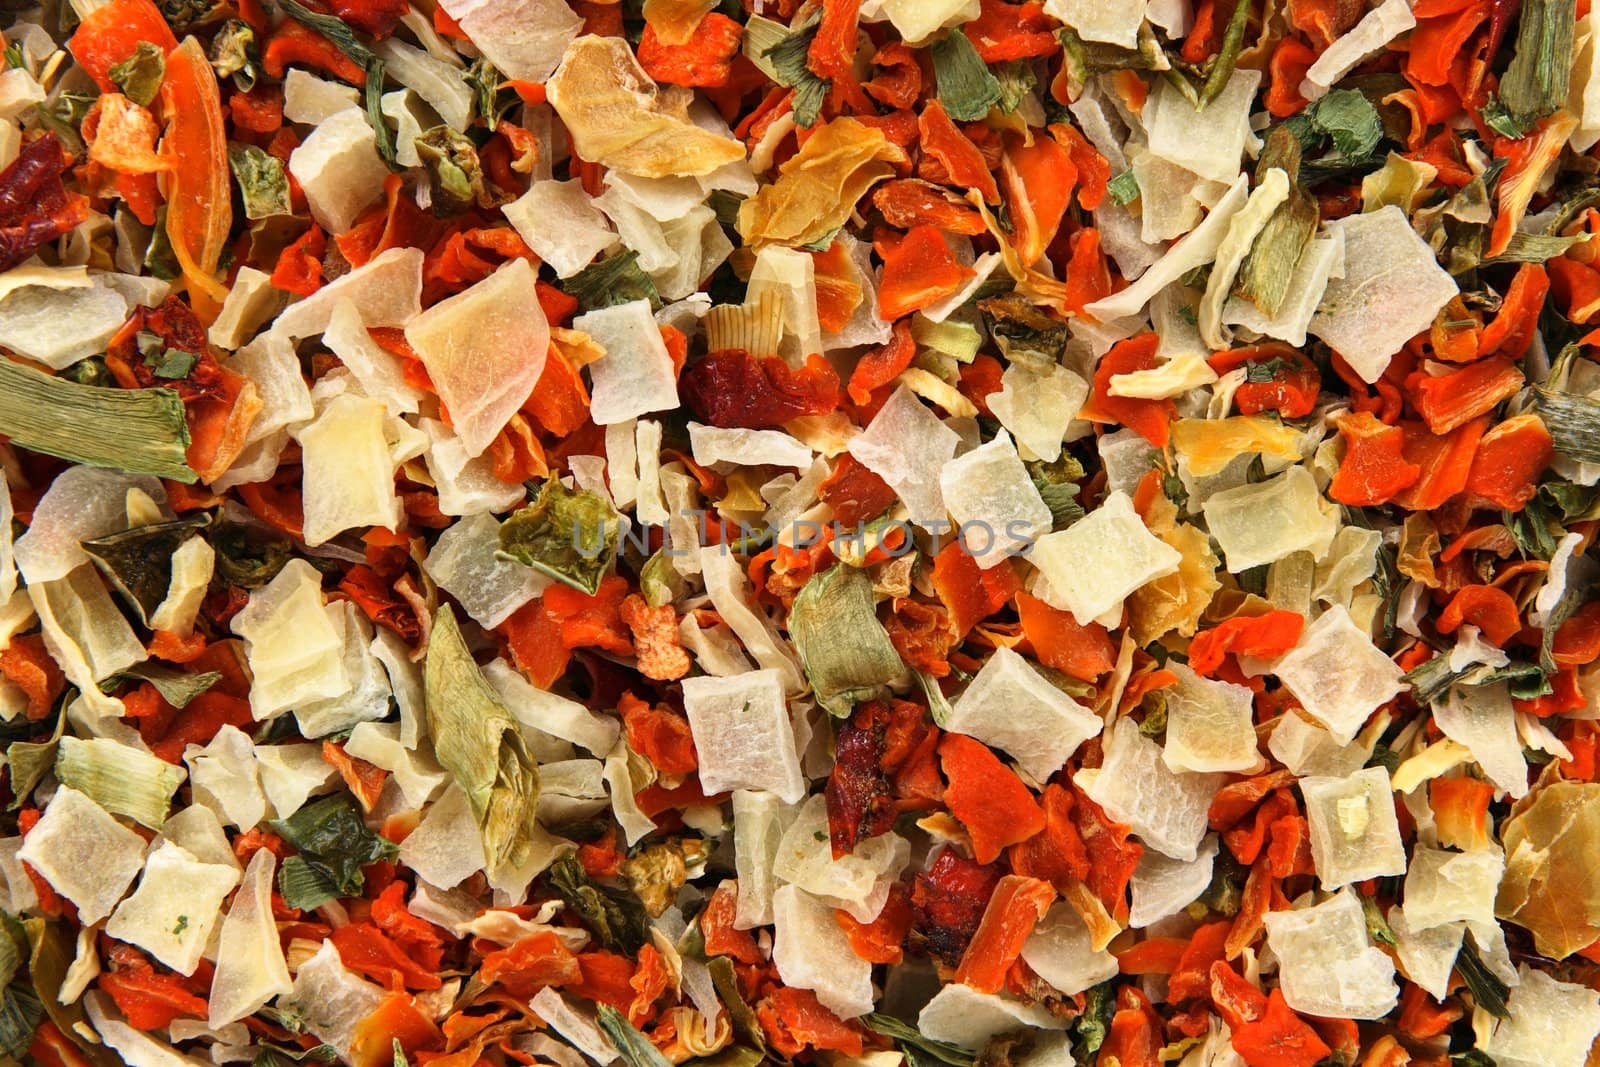 Background of dried vegetables and spices. Abstract food textures.